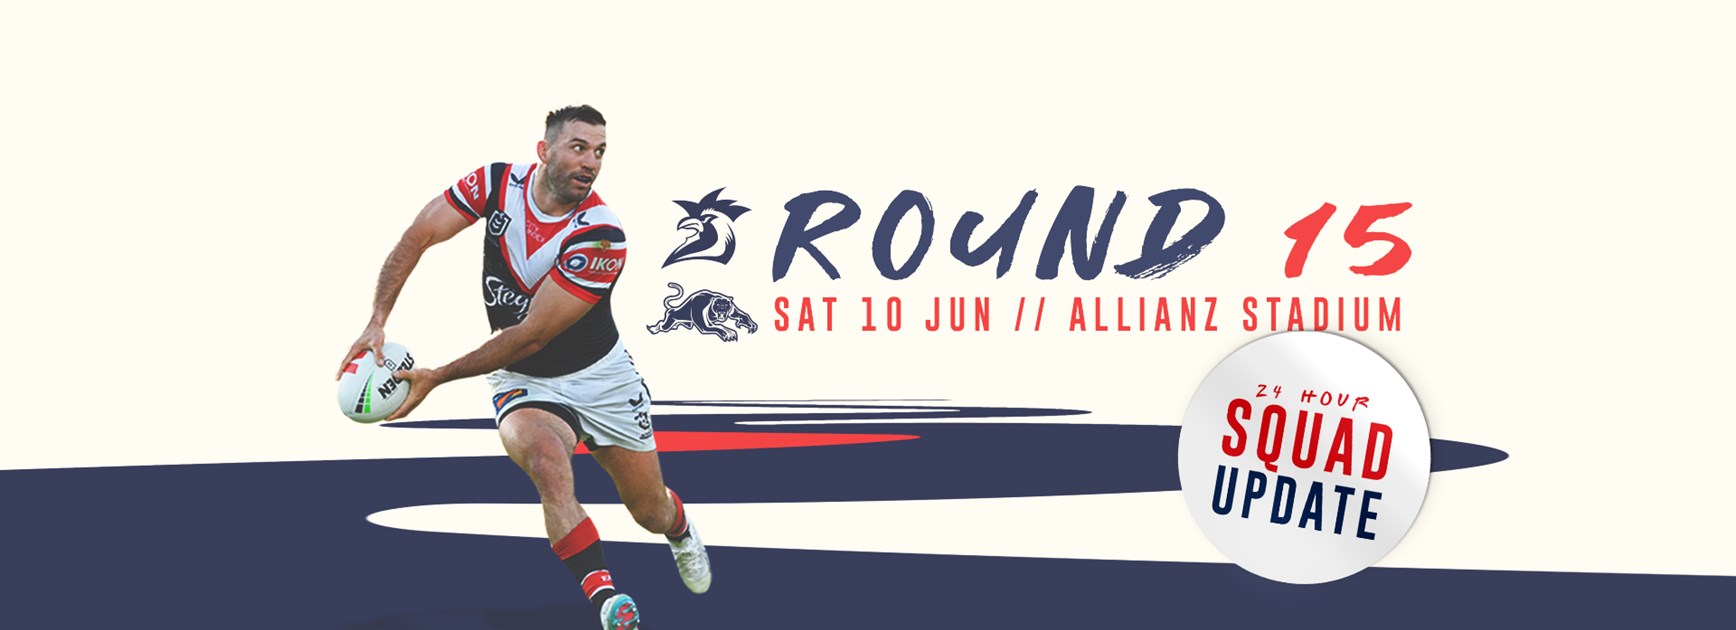 Squad Update: Round 15 vs Panthers